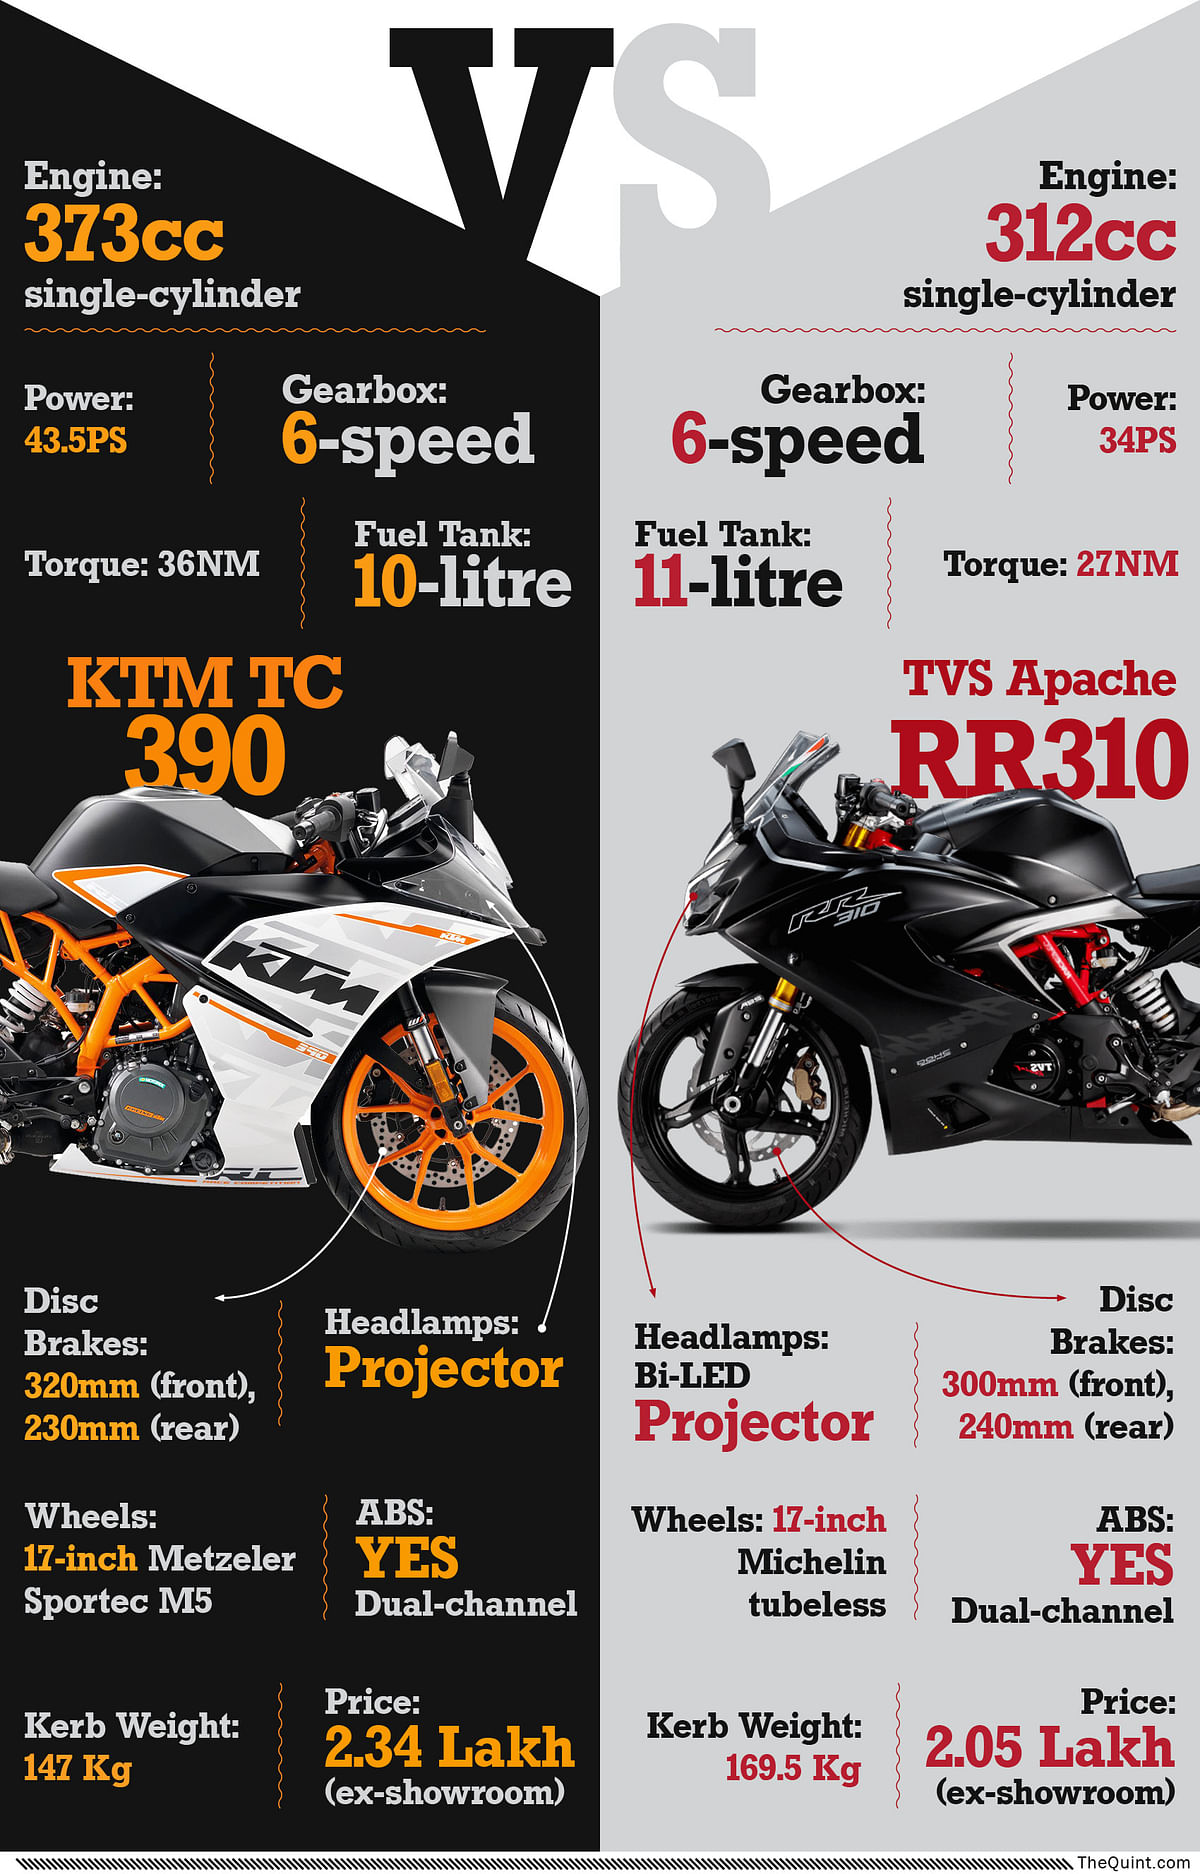 We compare the only two sports-centric bikes that sell for under Rs 3 lakh in the country. 